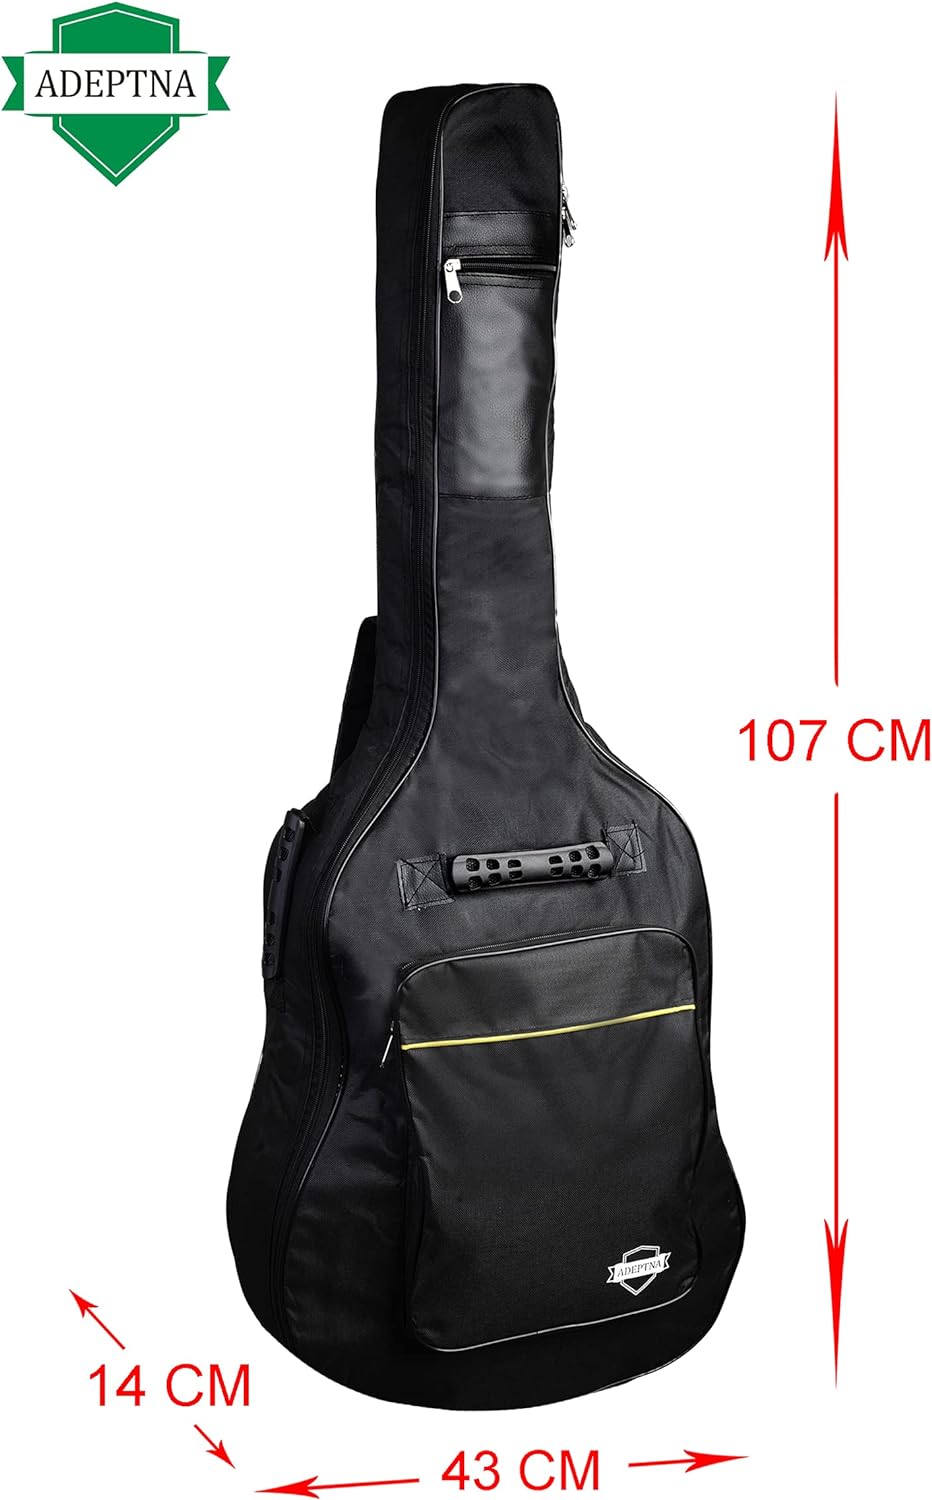 ADEPTNA Heavy Duty Full Size Padded Protective Waterproof Classical Acoustic Guitar Back Bag Carry Case-Fully Waterproof Cover, Foam Padding- Black